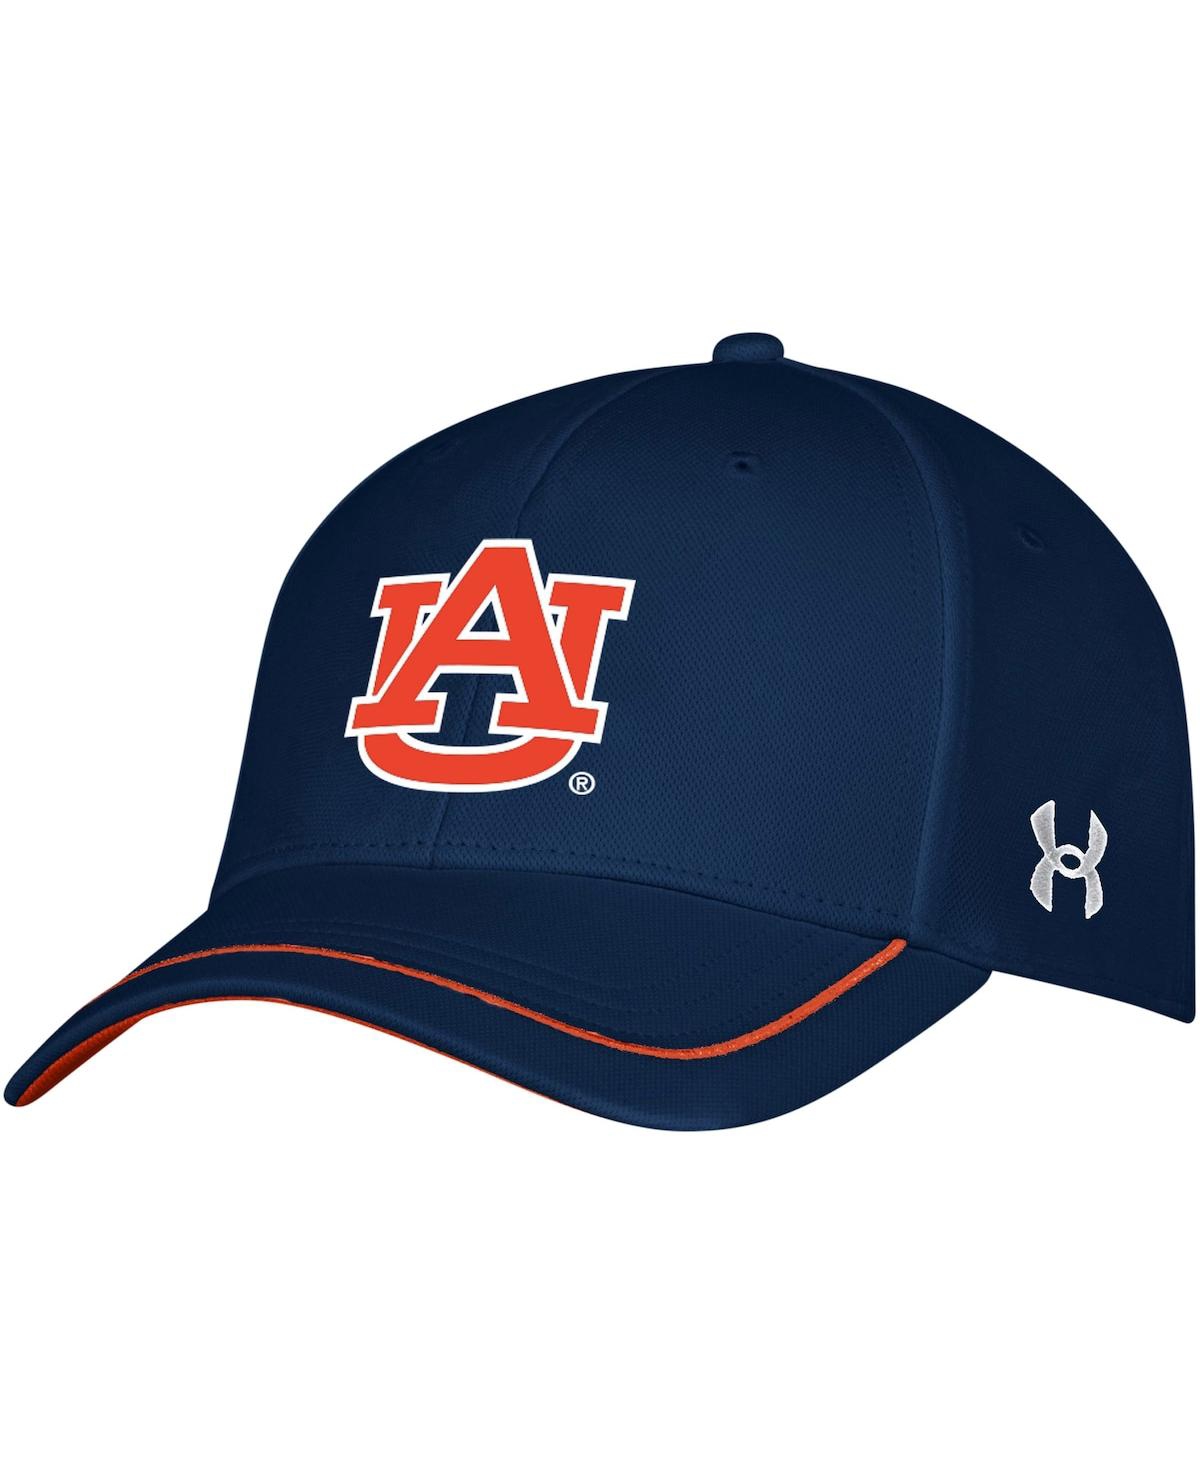 Shop Under Armour Men's  Navy Auburn Tigers Blitzing Accent Iso-chill Adjustable Hat